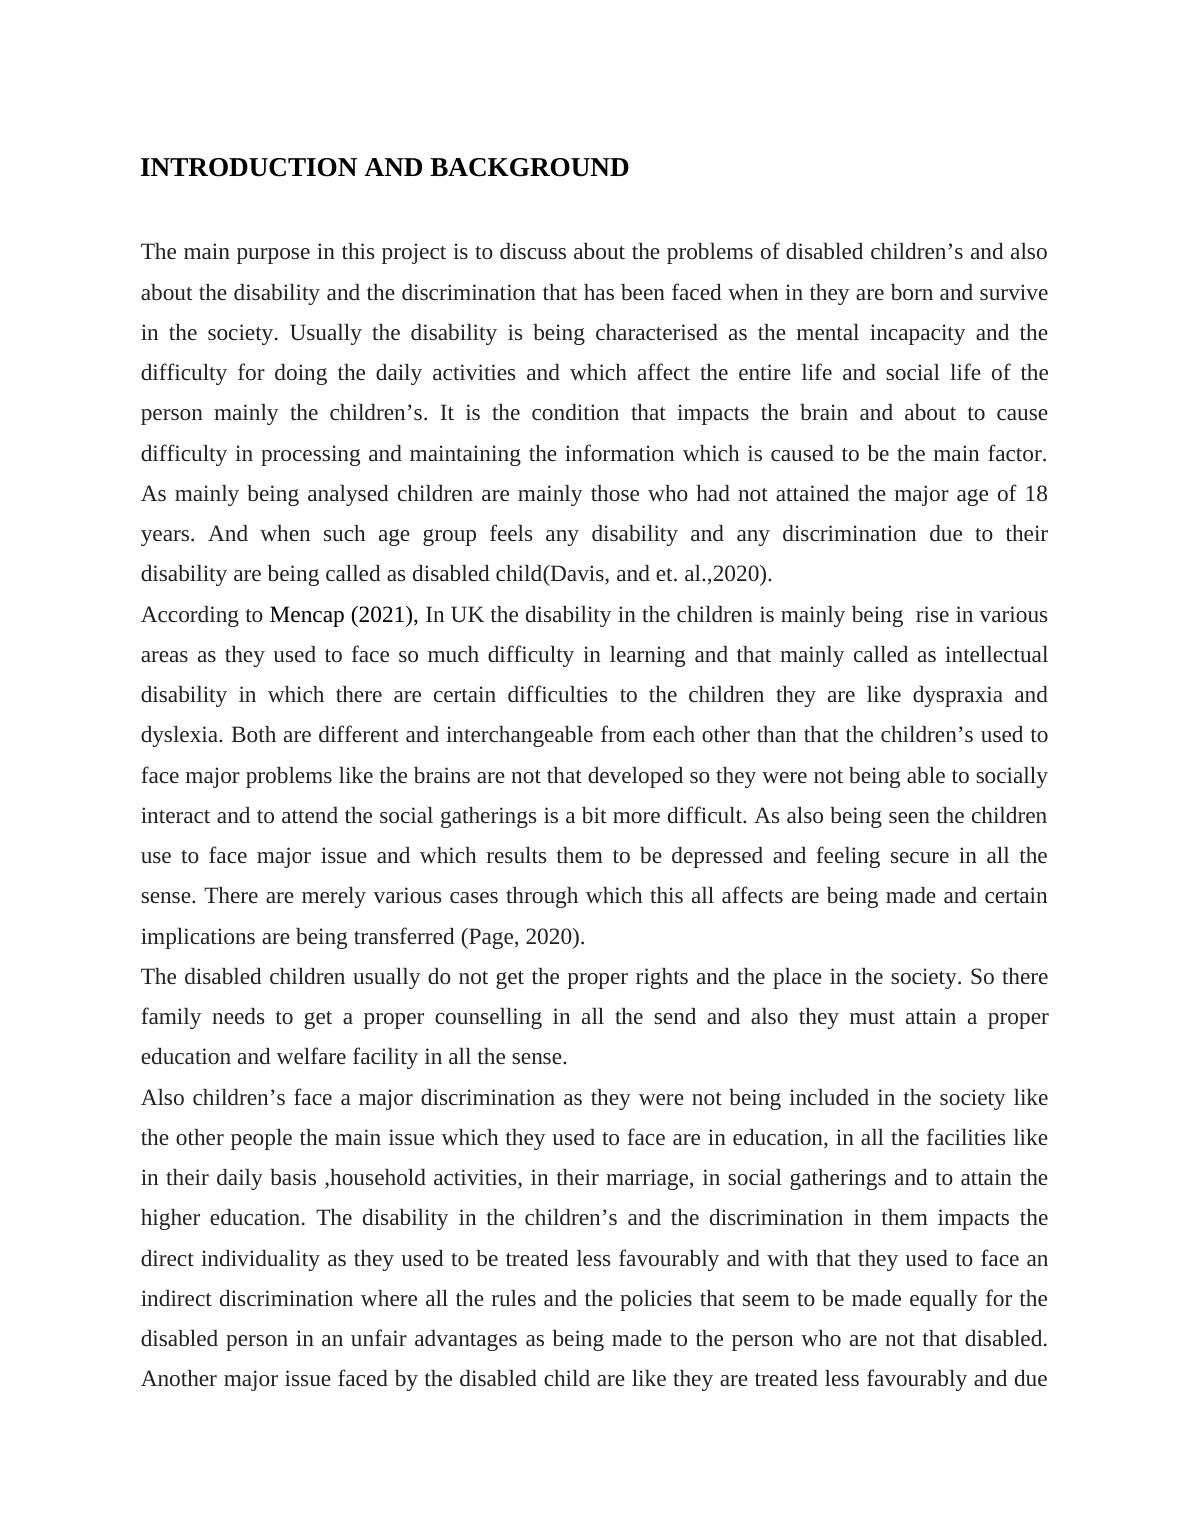 Problems of Disabled Children: Discrimination and Rights_3